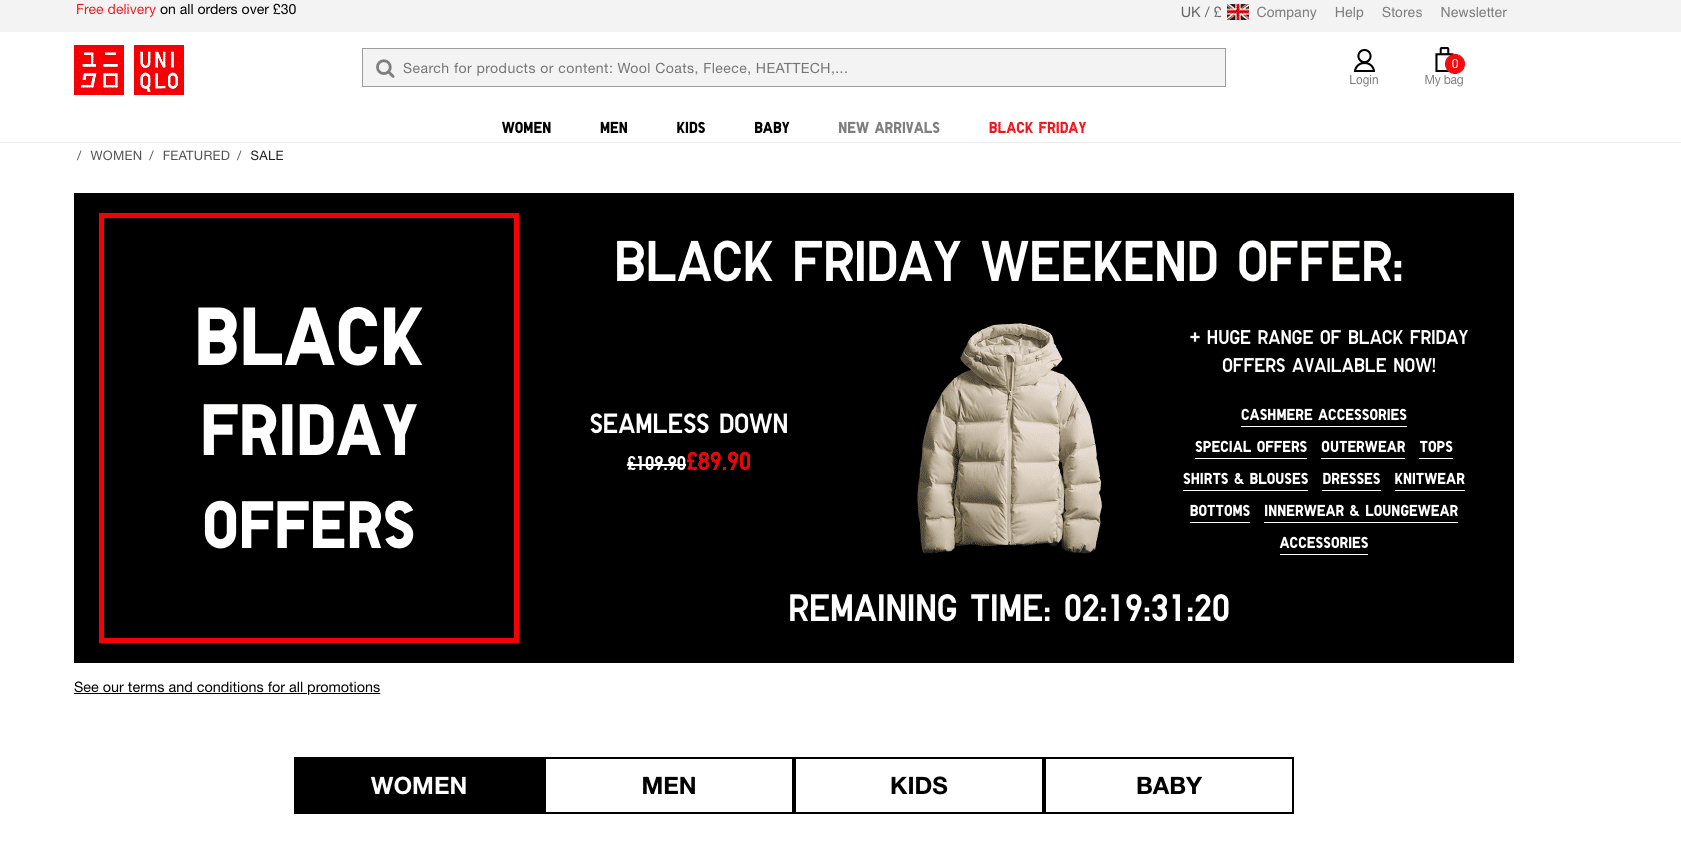 UNIQLO showing discounts on category page